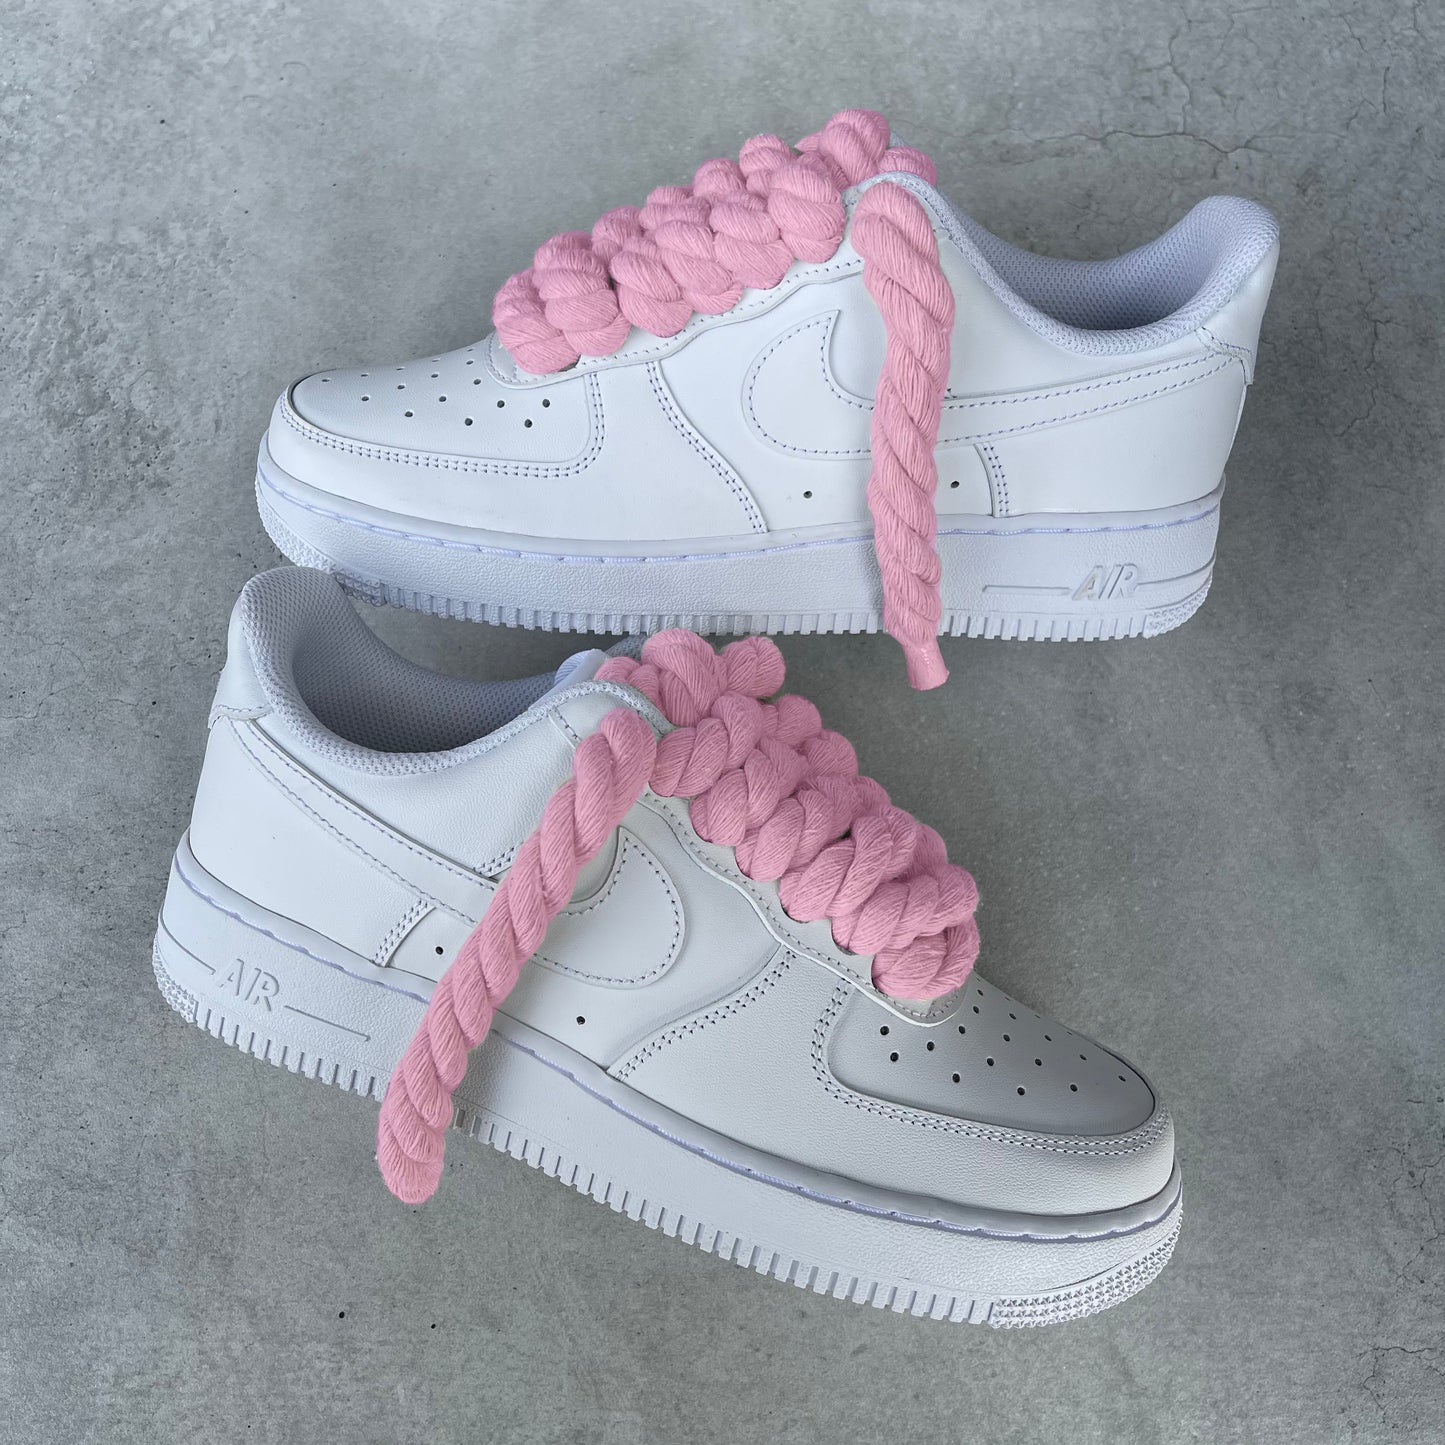 Custom AIR FORCE 1 - Rope laces (pink)